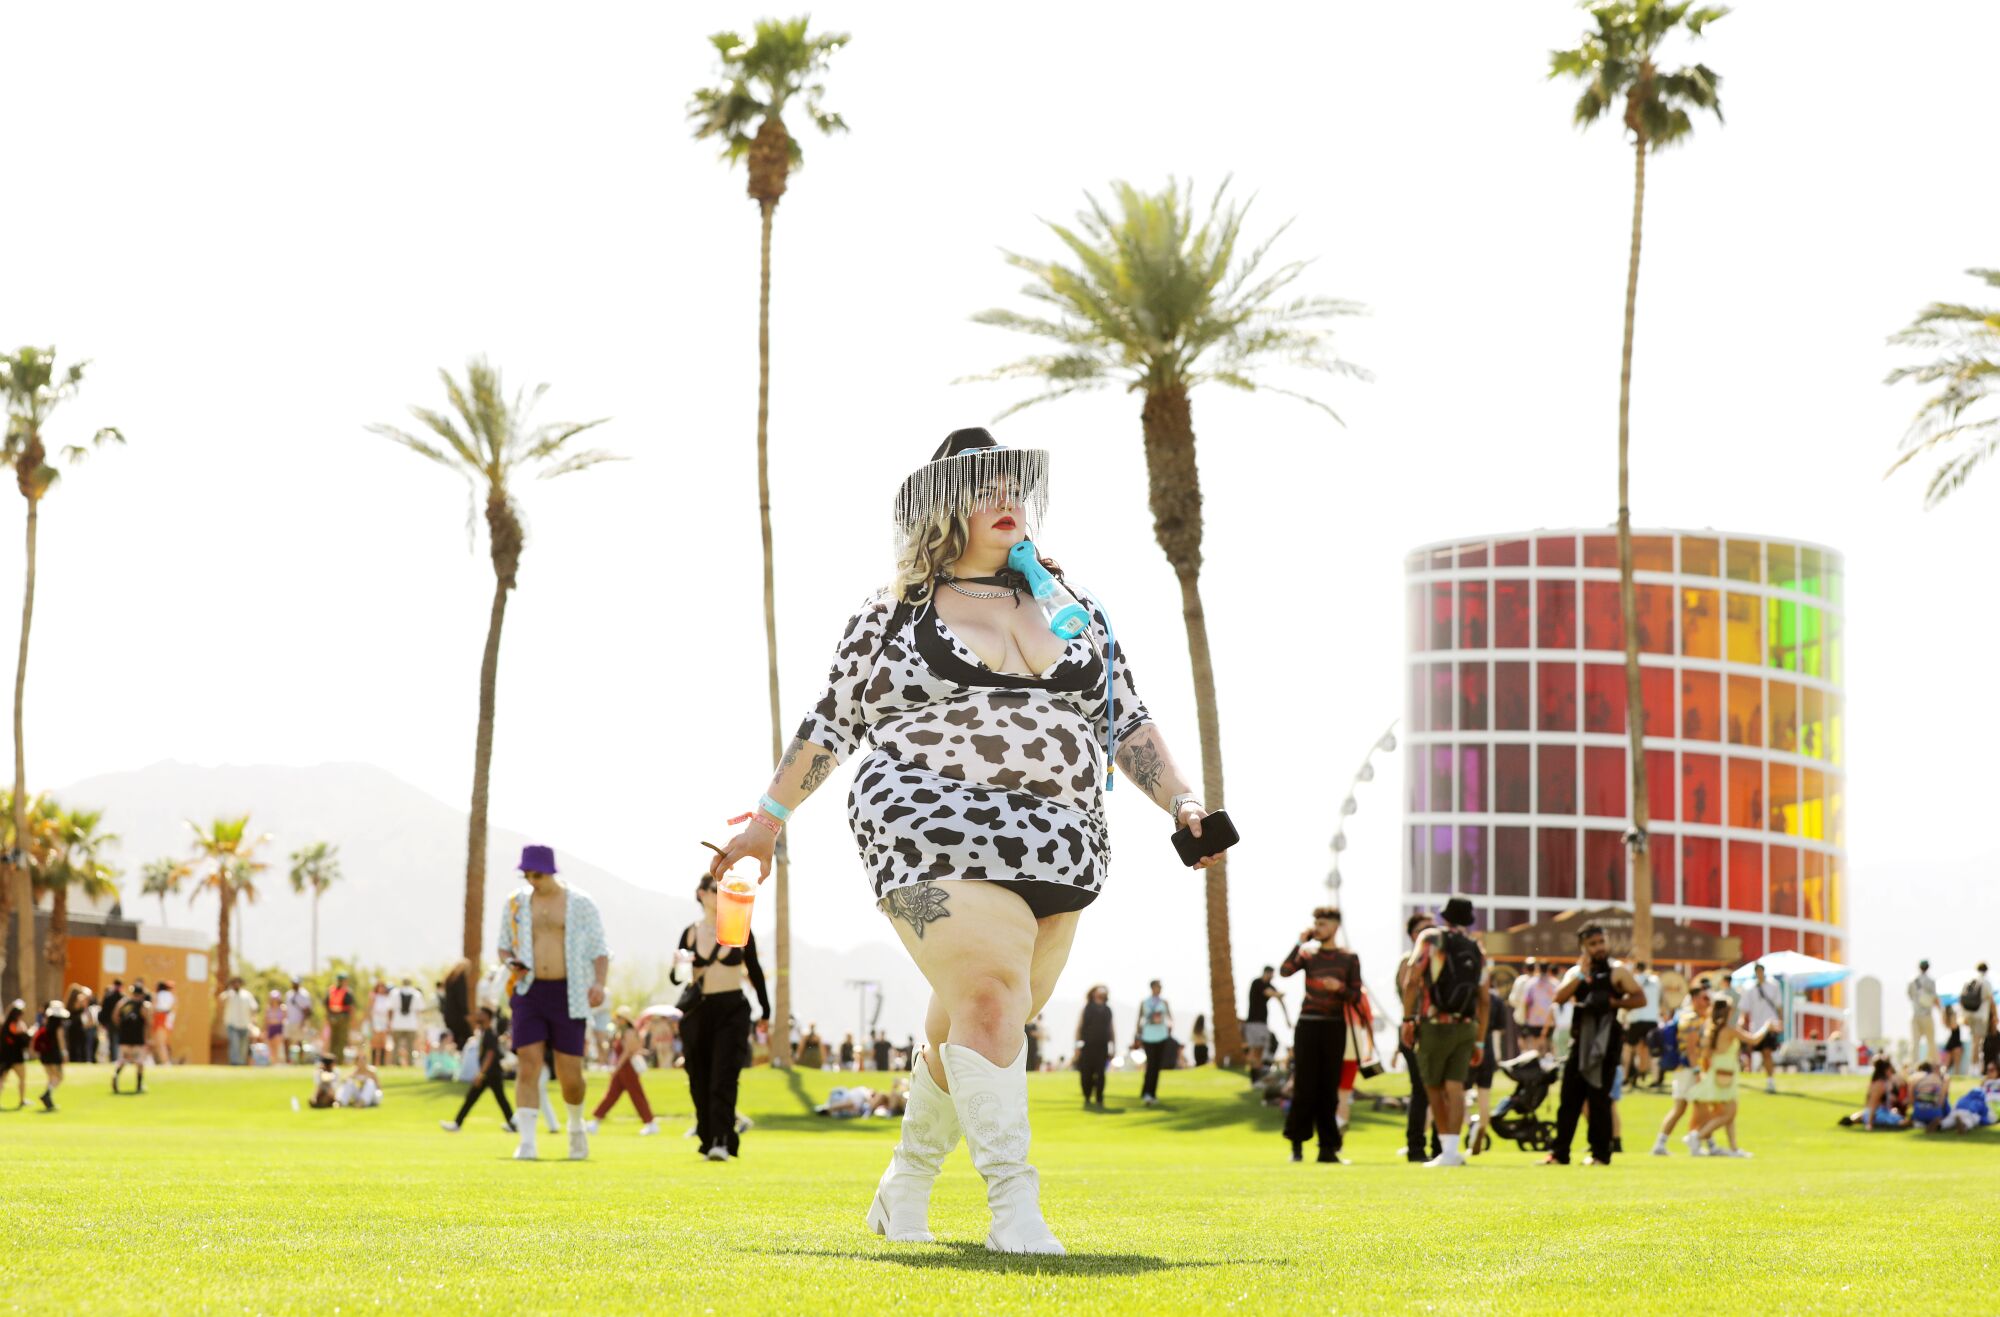 A woman walks on grass at Coachella with palm trees behind her